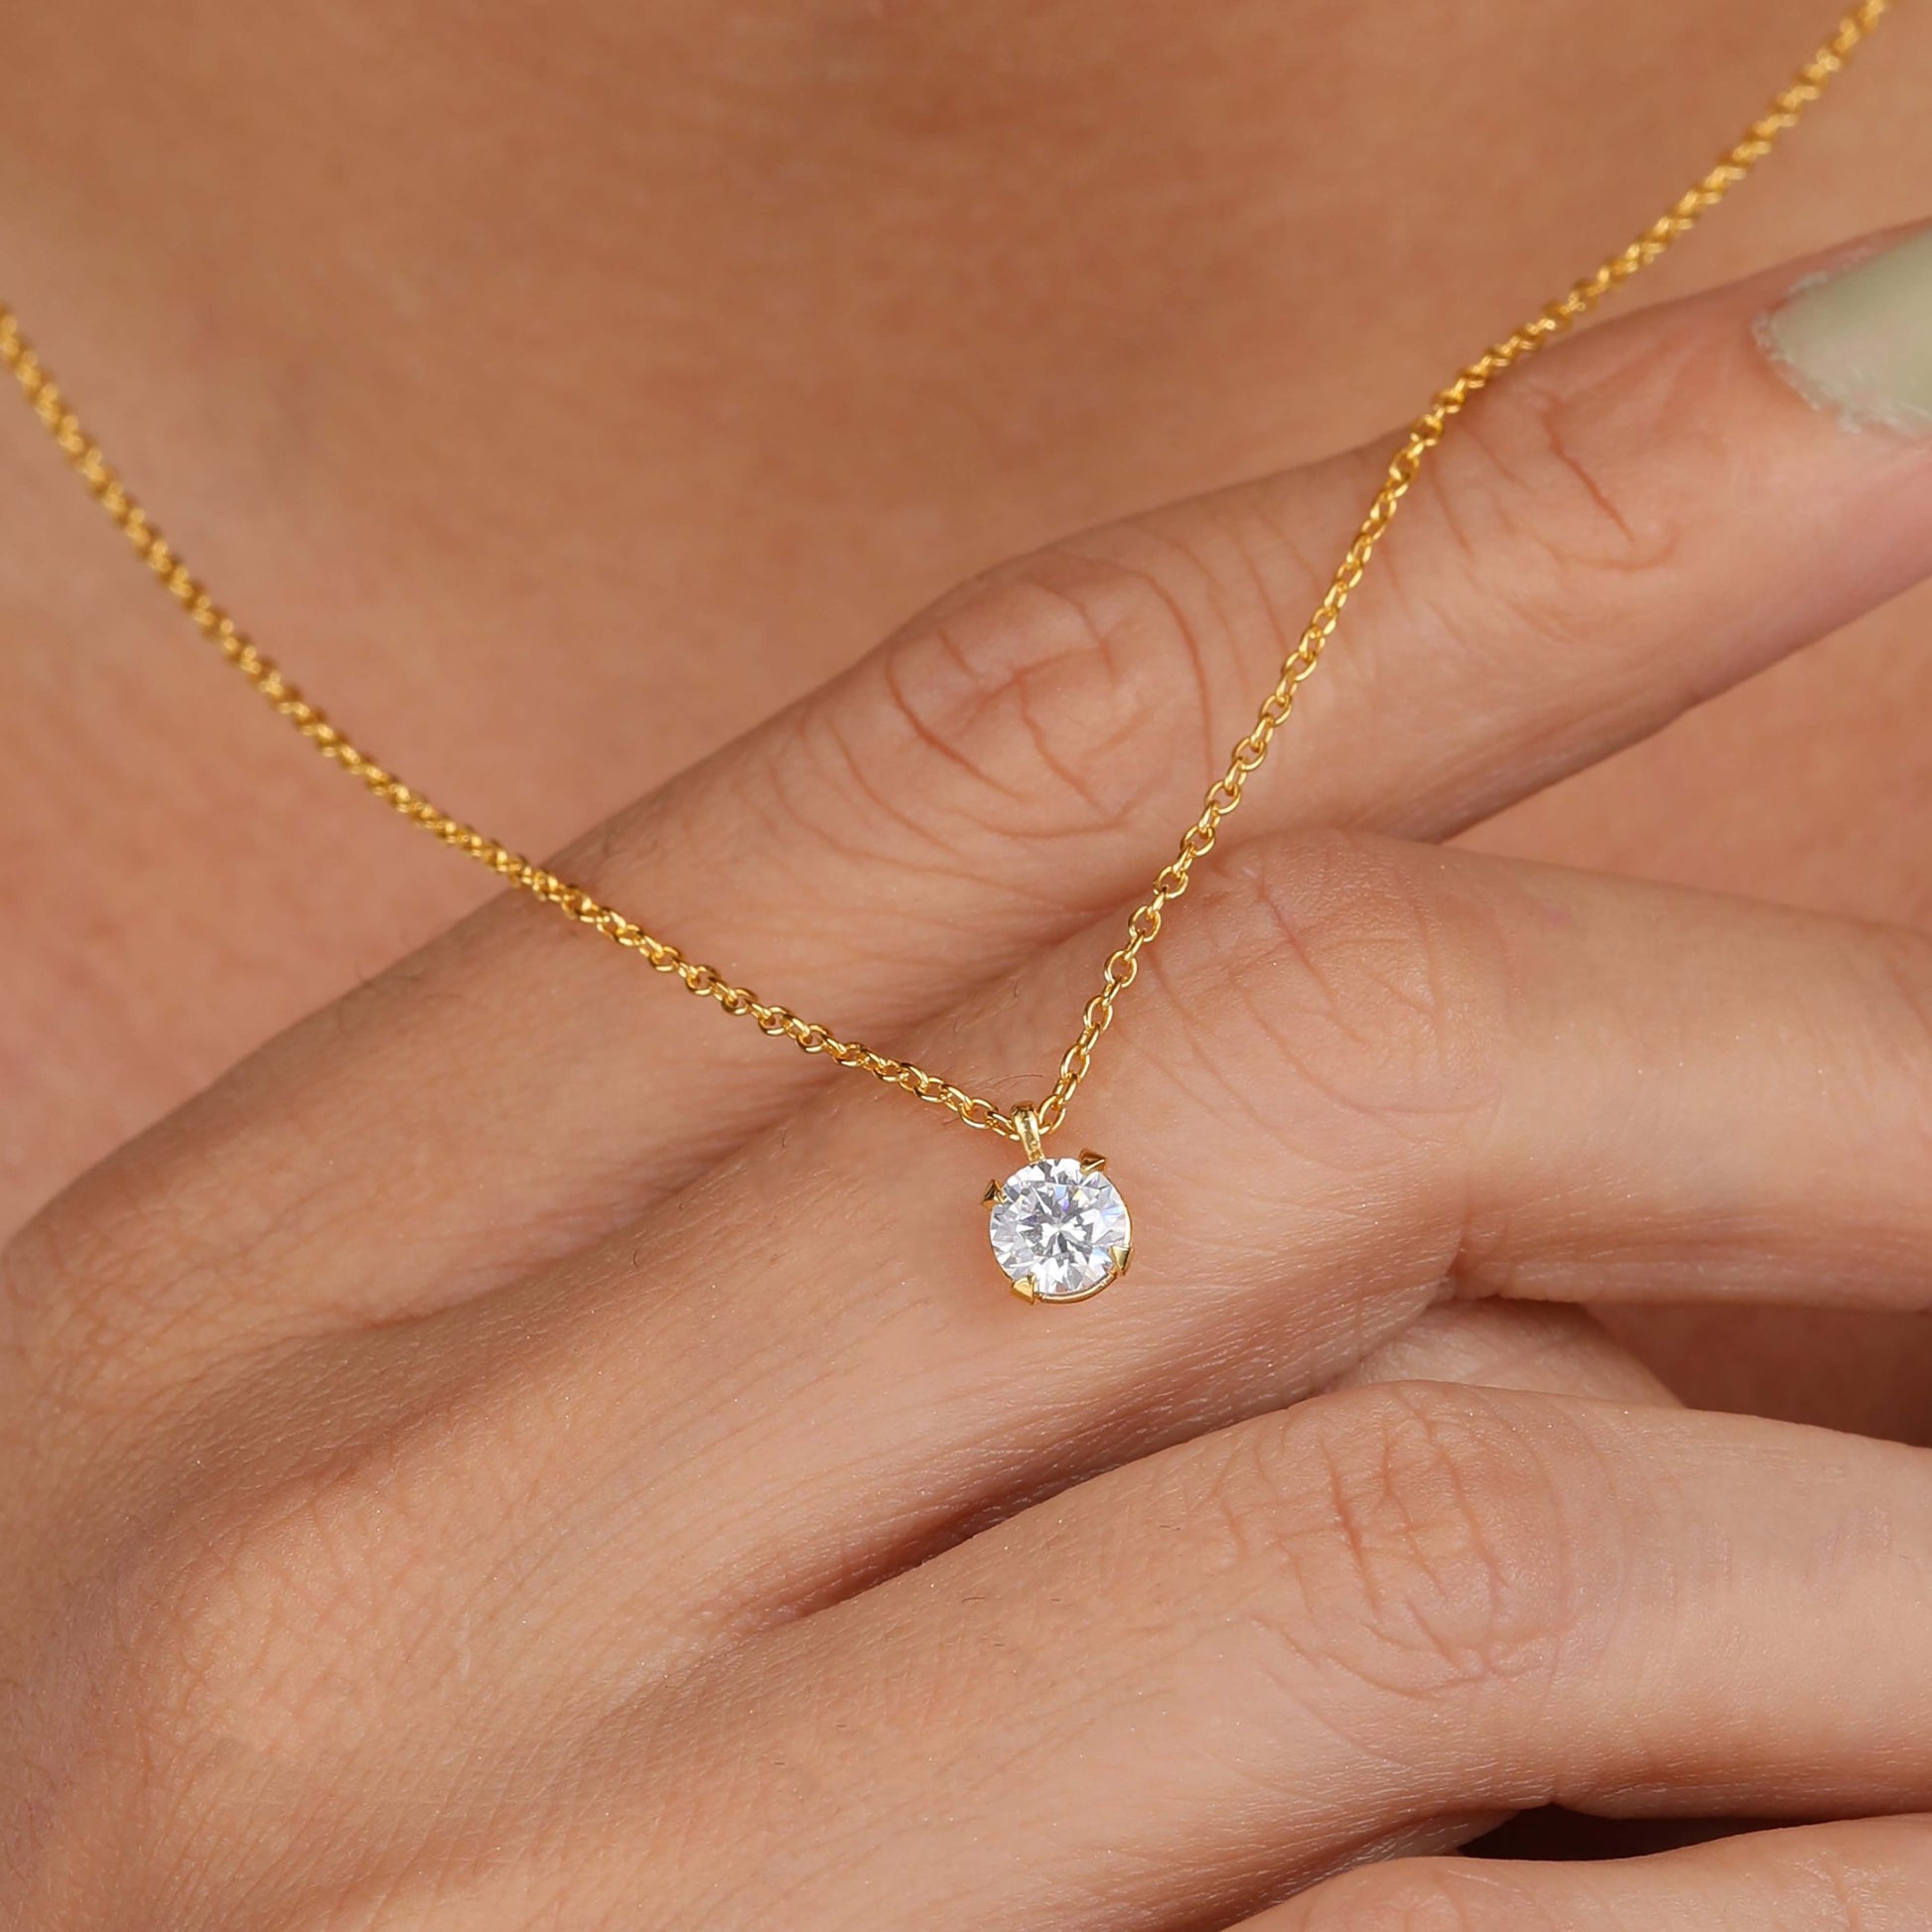 solitaire diamond pendant necklace with 4 prong